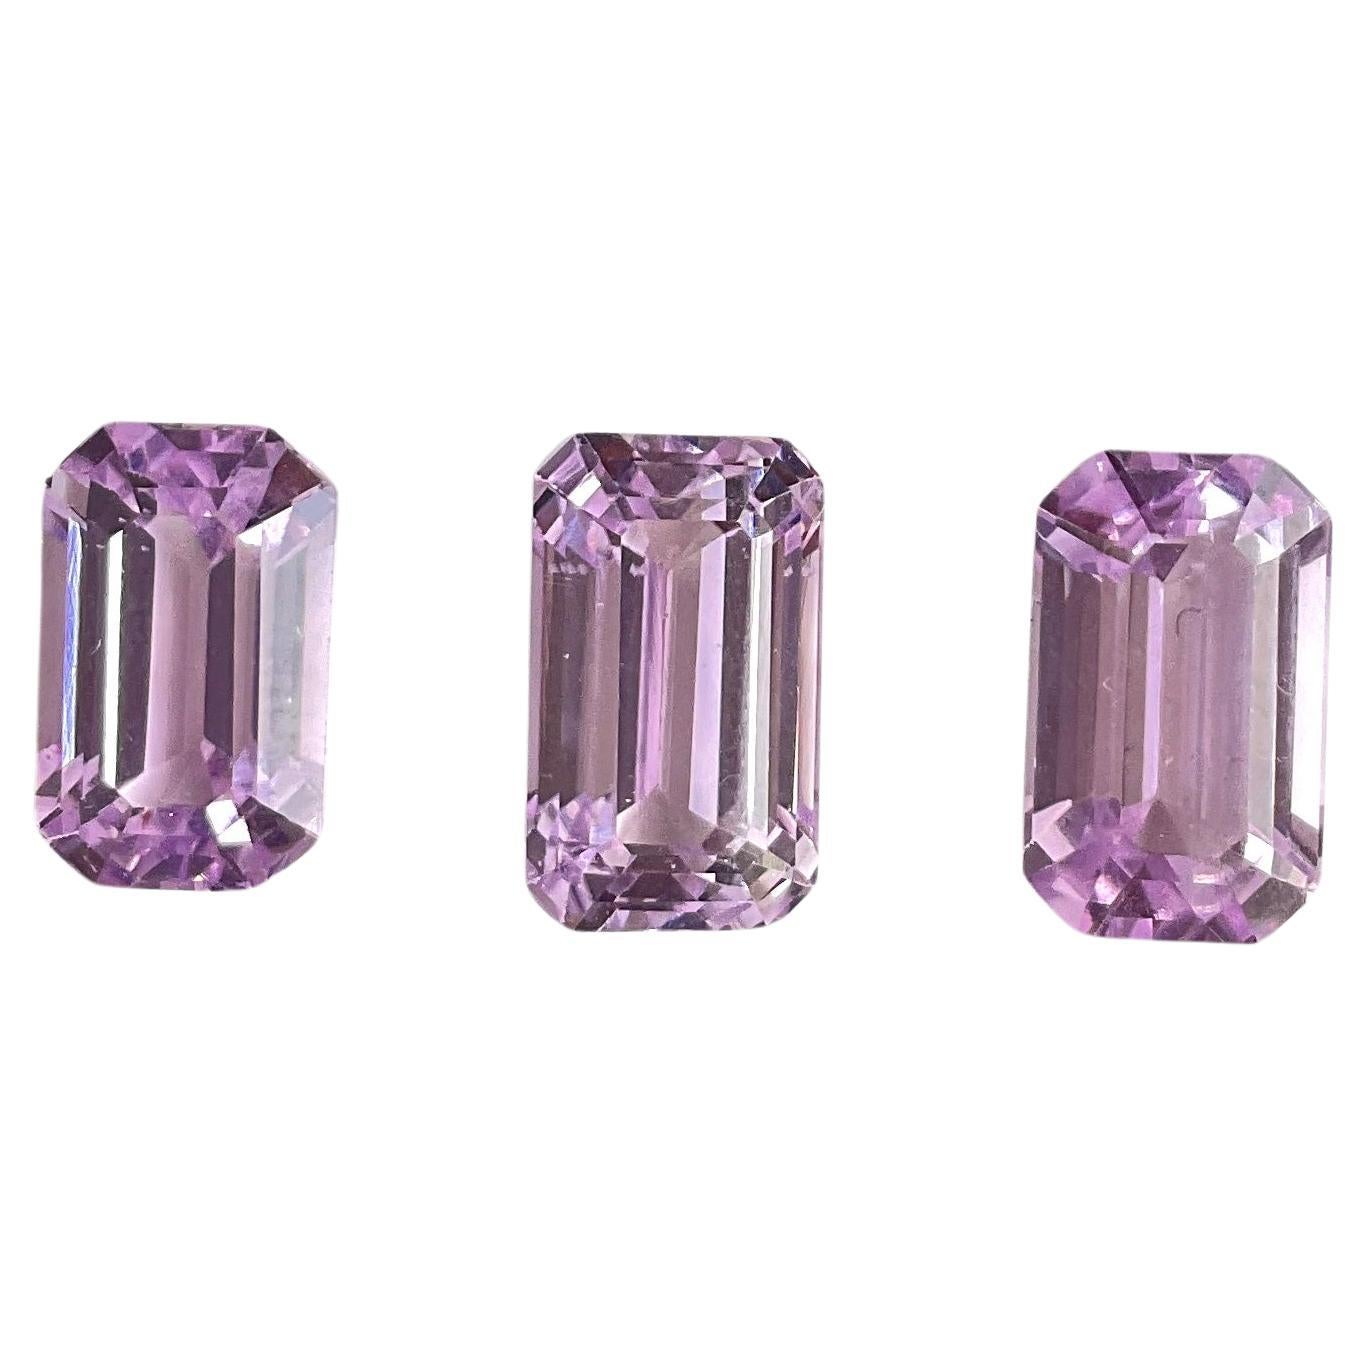 34.29 Carats Pink Kunzite Octagon Natural Cut Stones For Fine Gem Jewellery For Sale